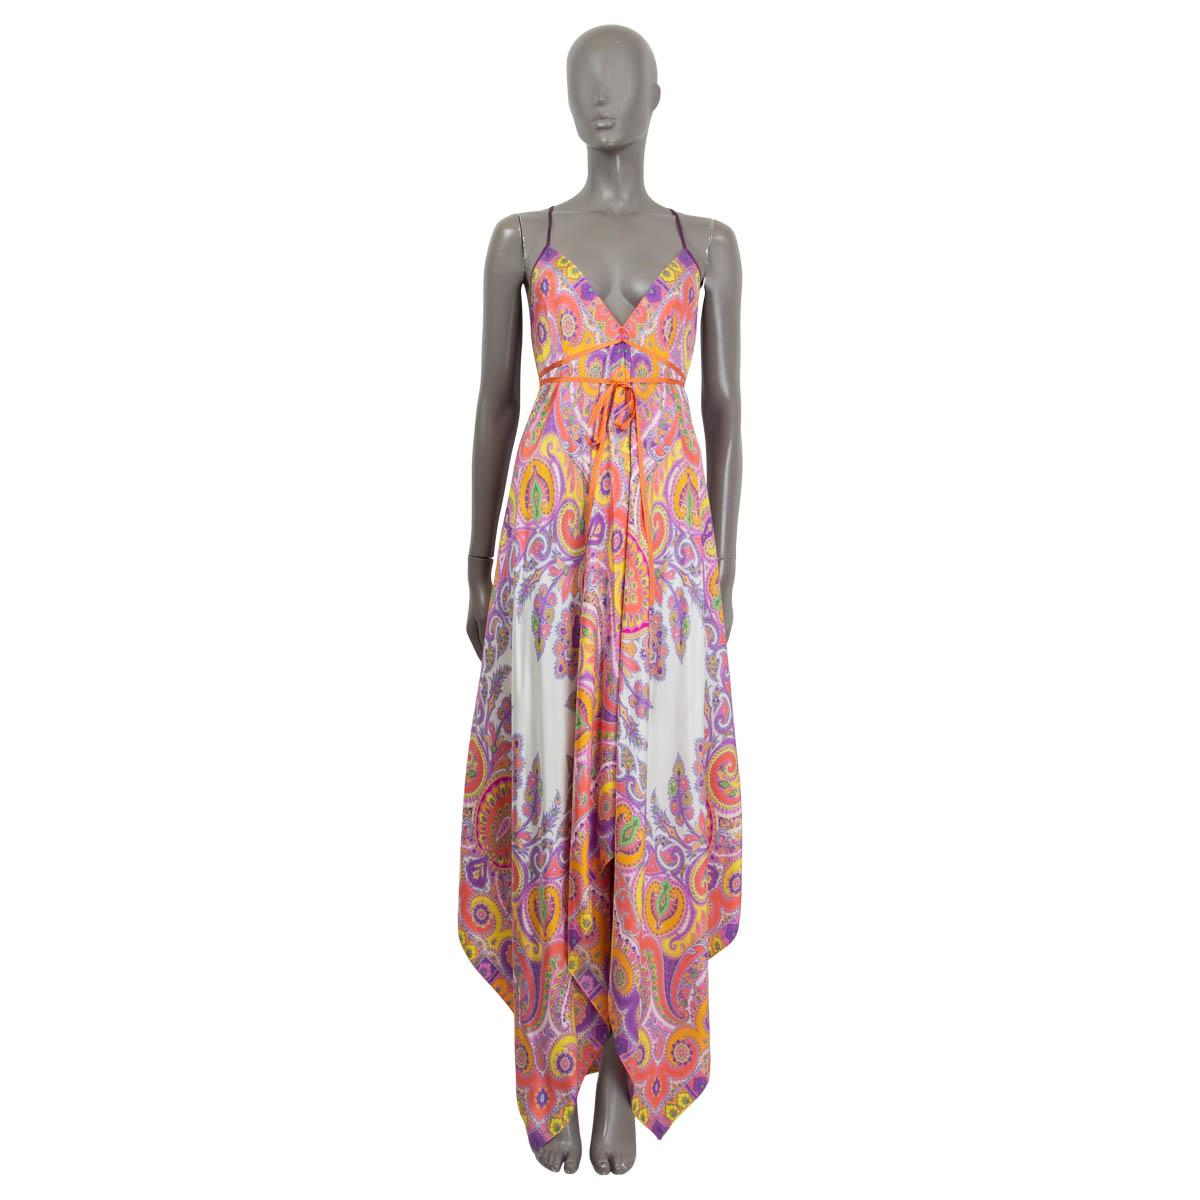 100% authentic Etro Moonlight sleeveless maxi dress in purple, orange, white and green paisley printed silk (100%) - please note the content tag is missing. Features a V-neck, spaghetti straps, an A-line silhouette with racer back, handkerchief hem